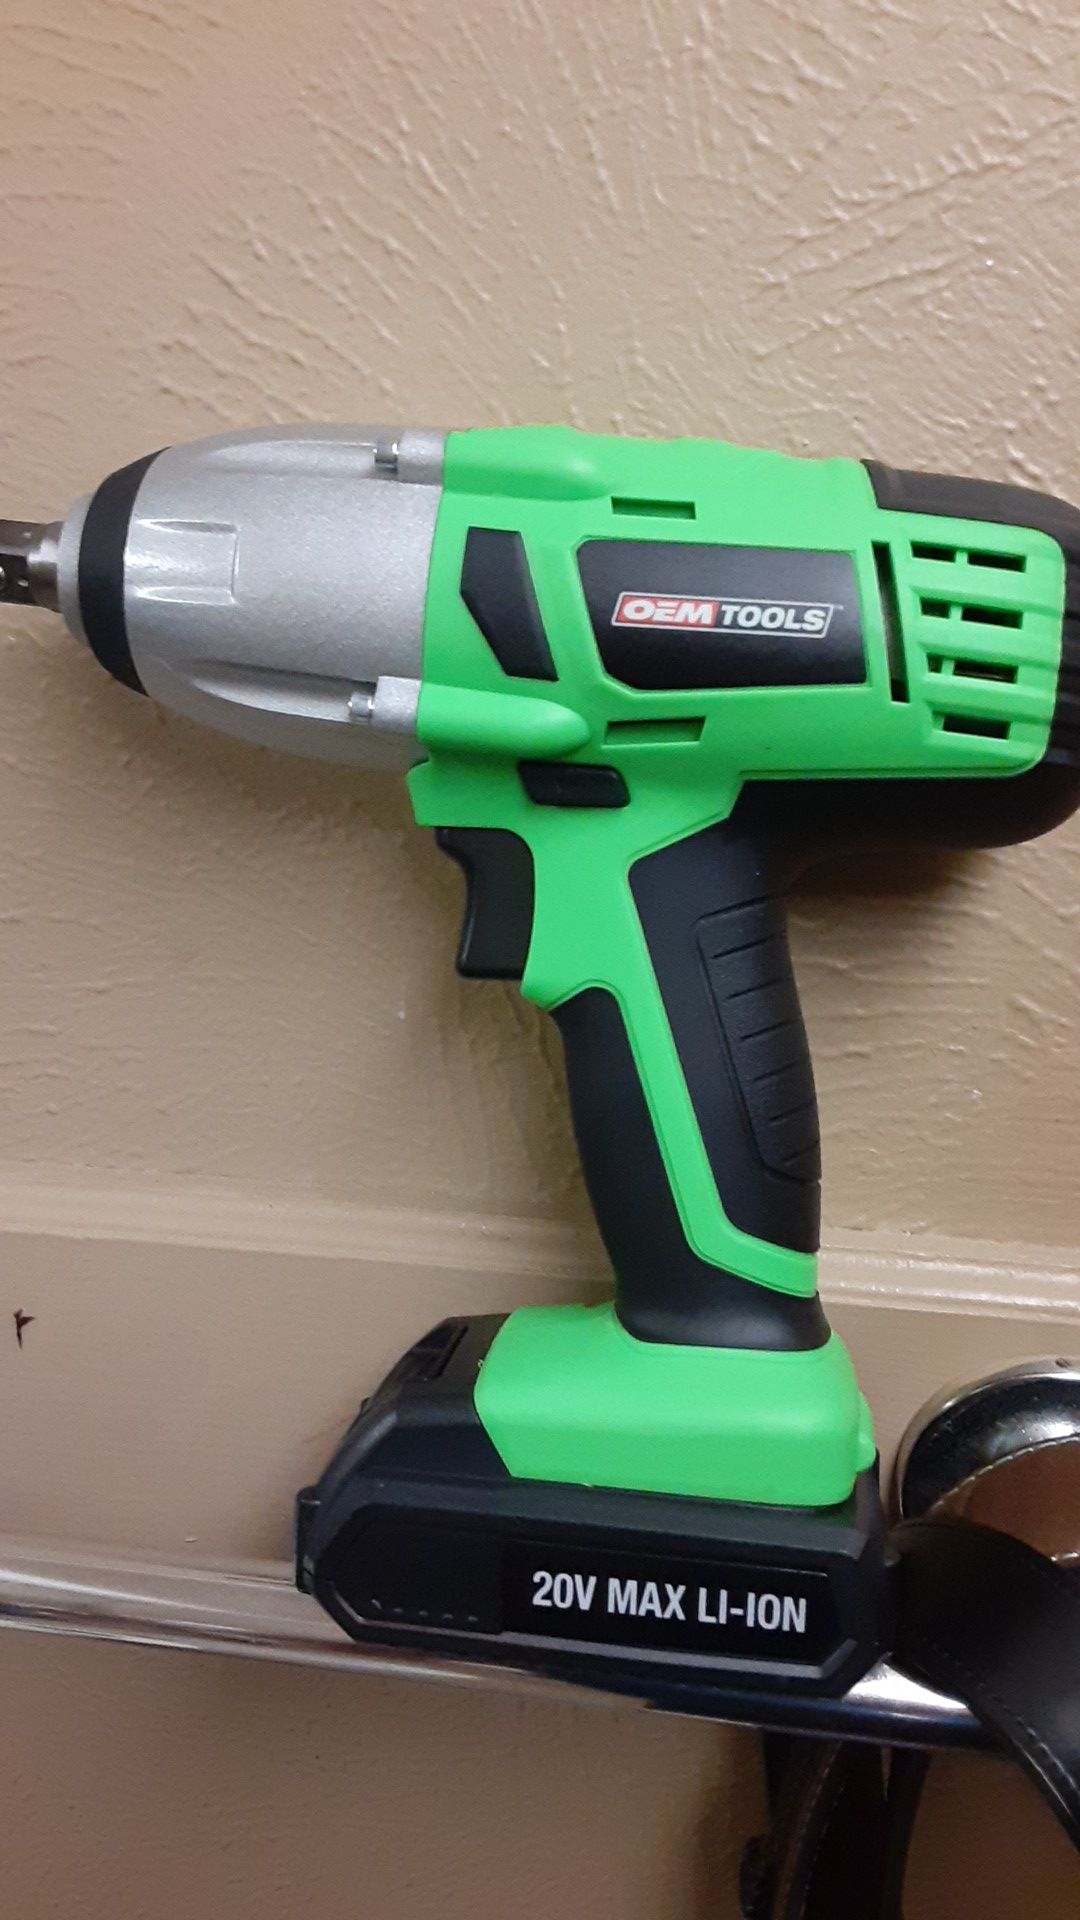 Brand new OEM 1/2" 20v impact wrench with battery and charger